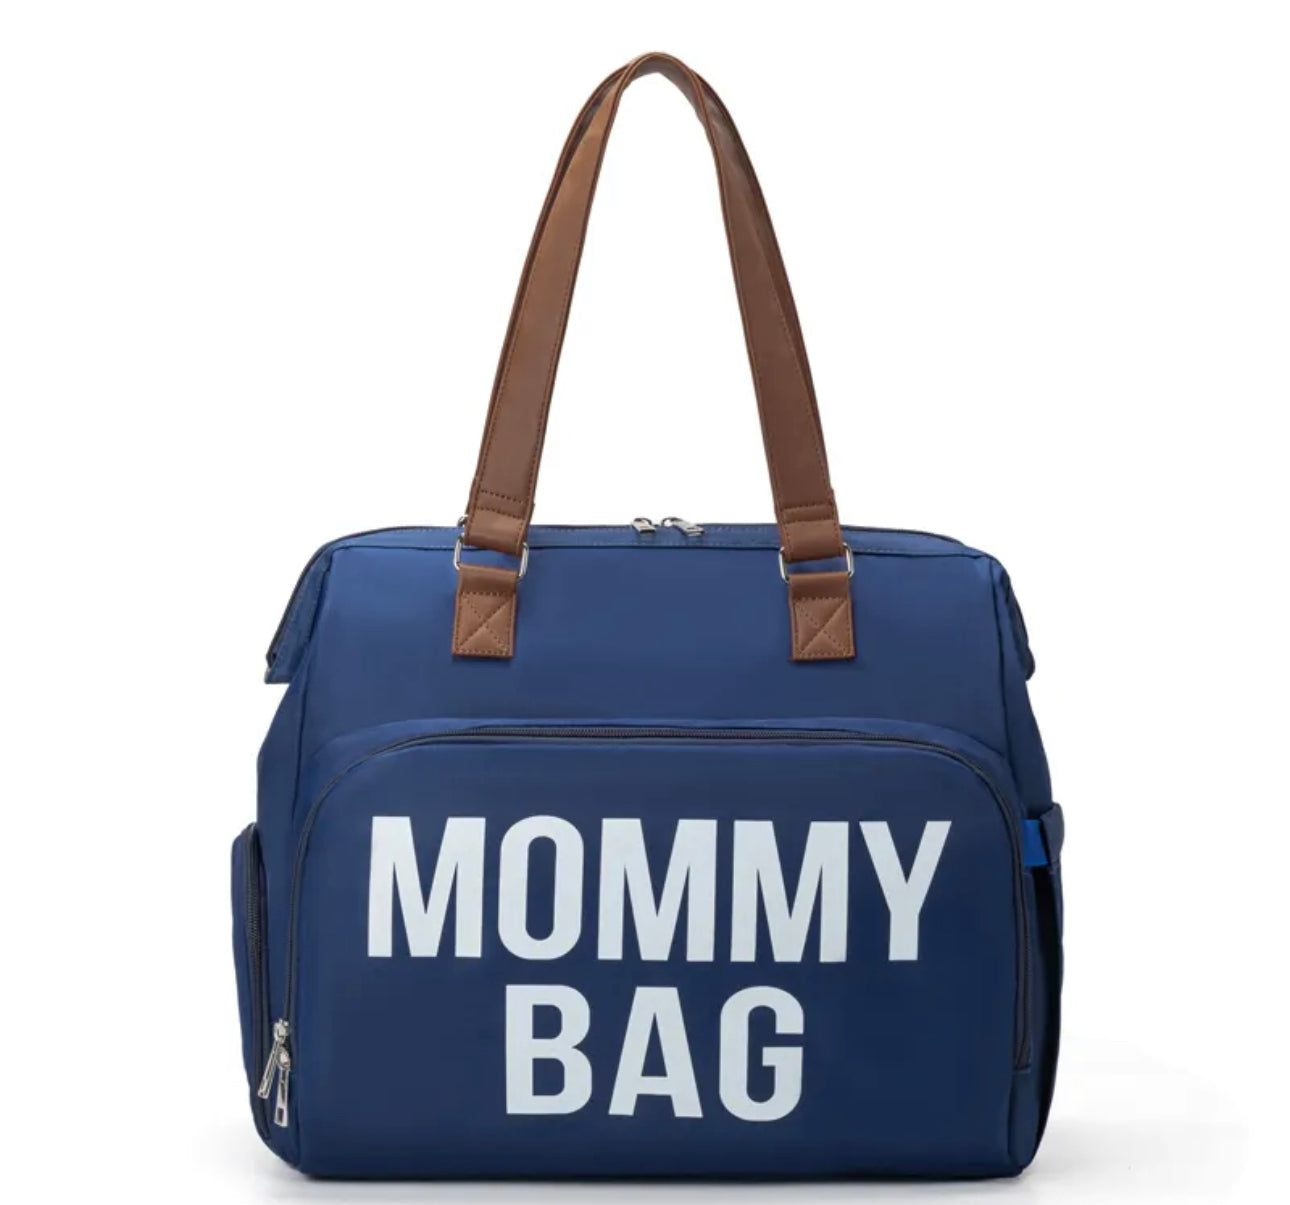 Mommy Bag Totes